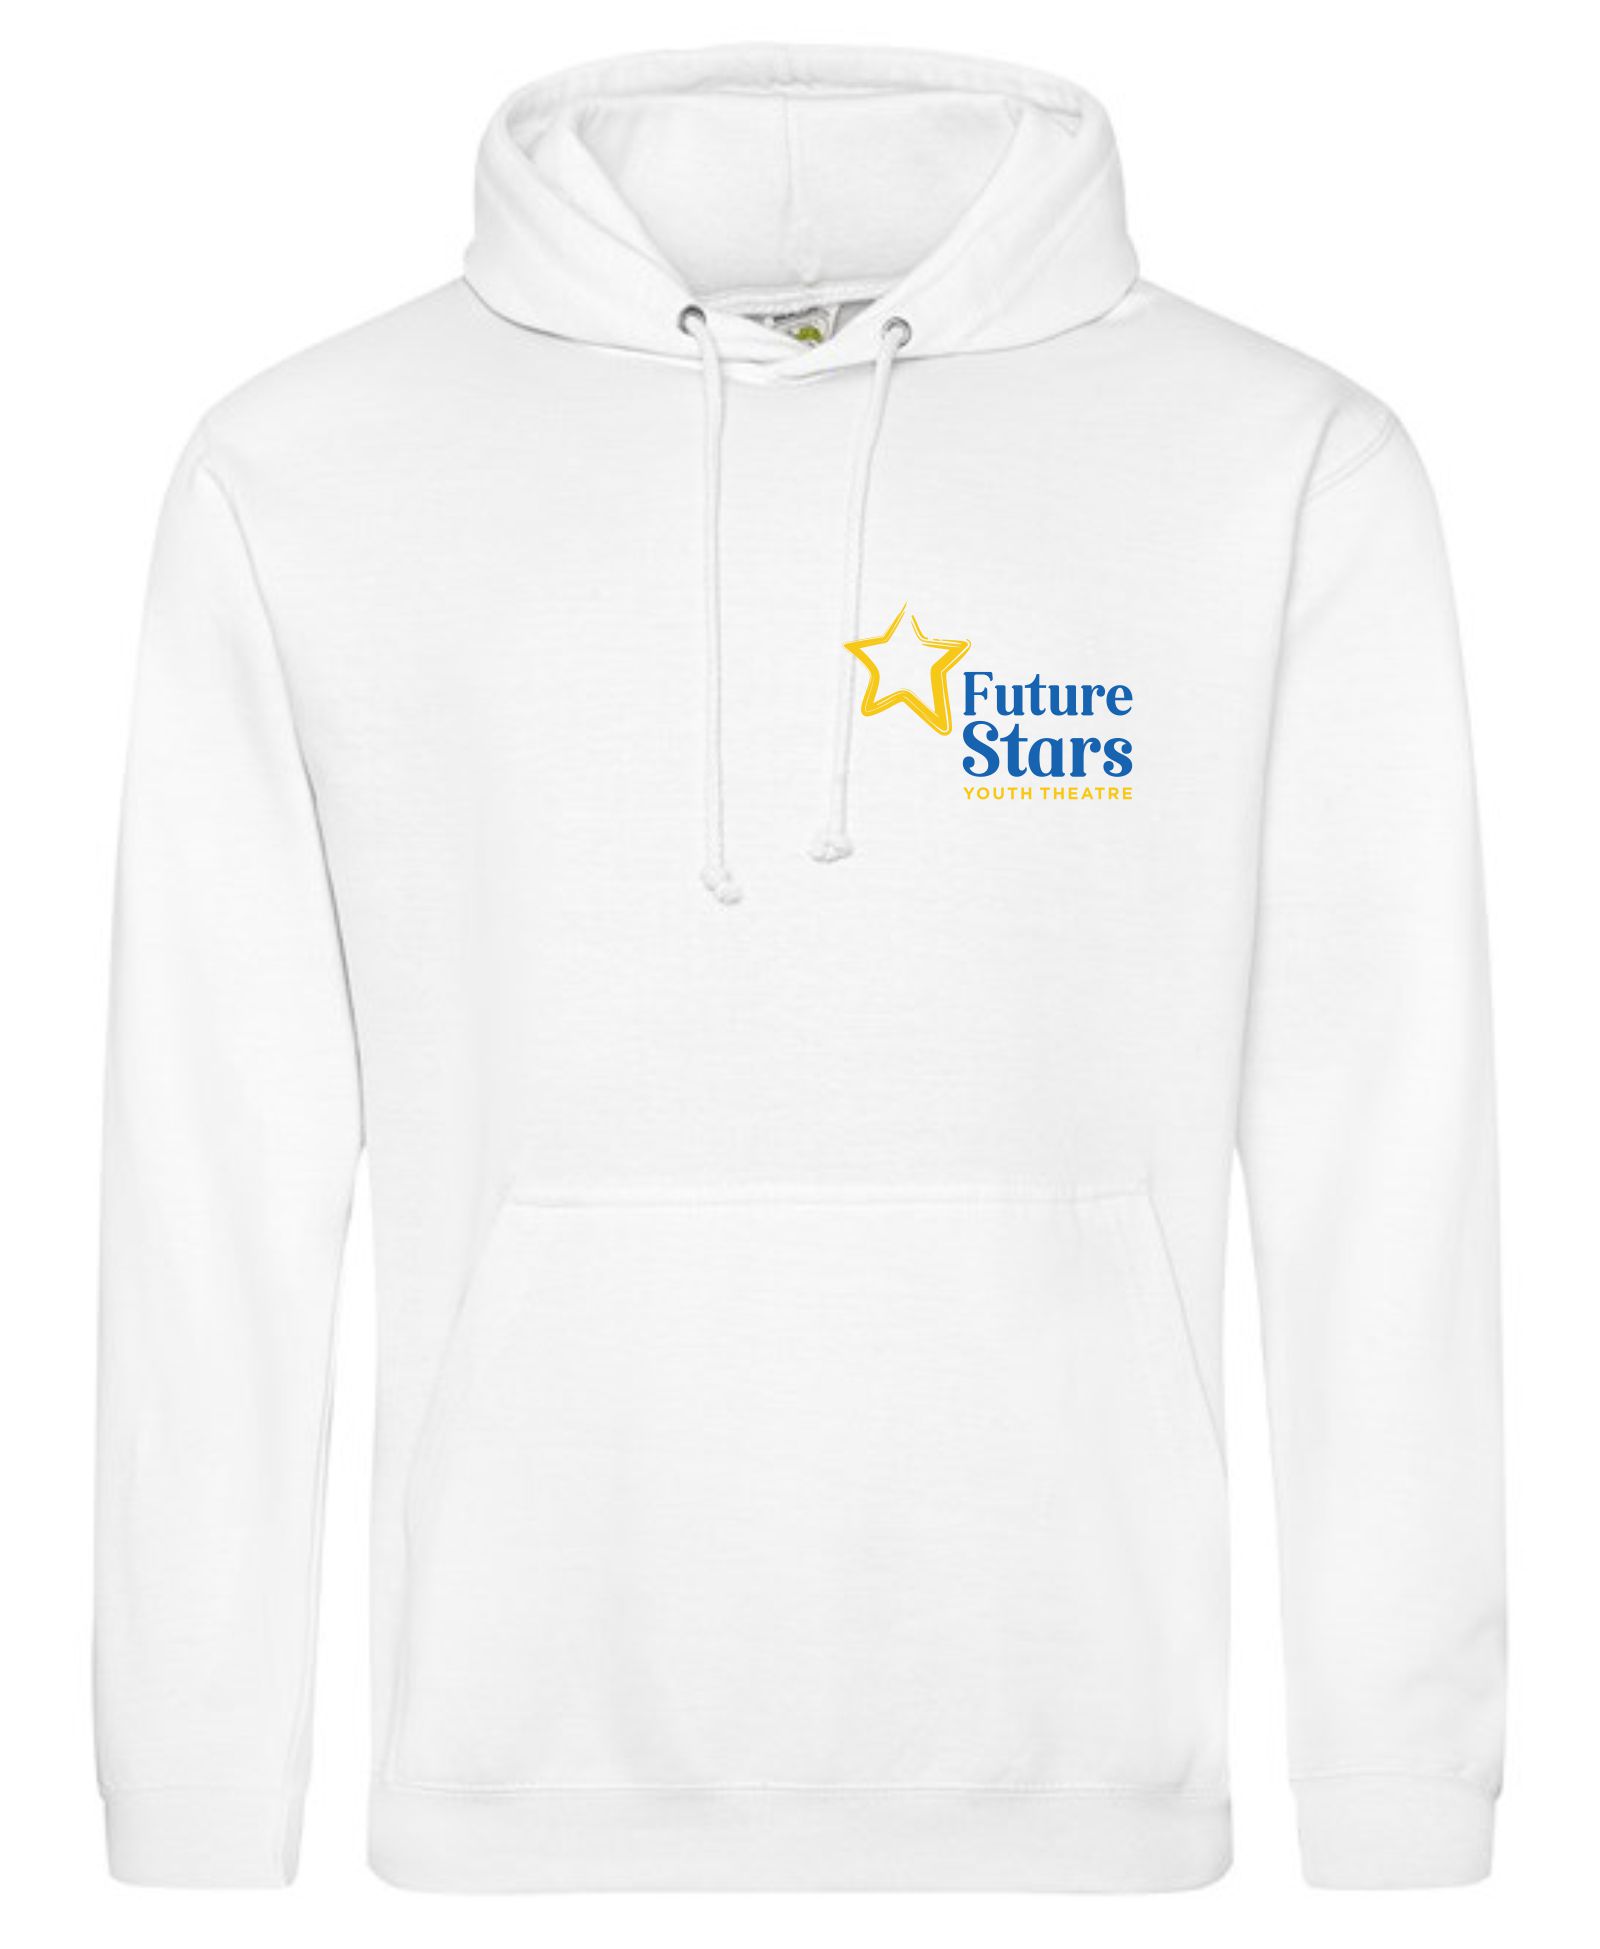 Future Stars Youth Theatre – White Hoodie (Adults) 